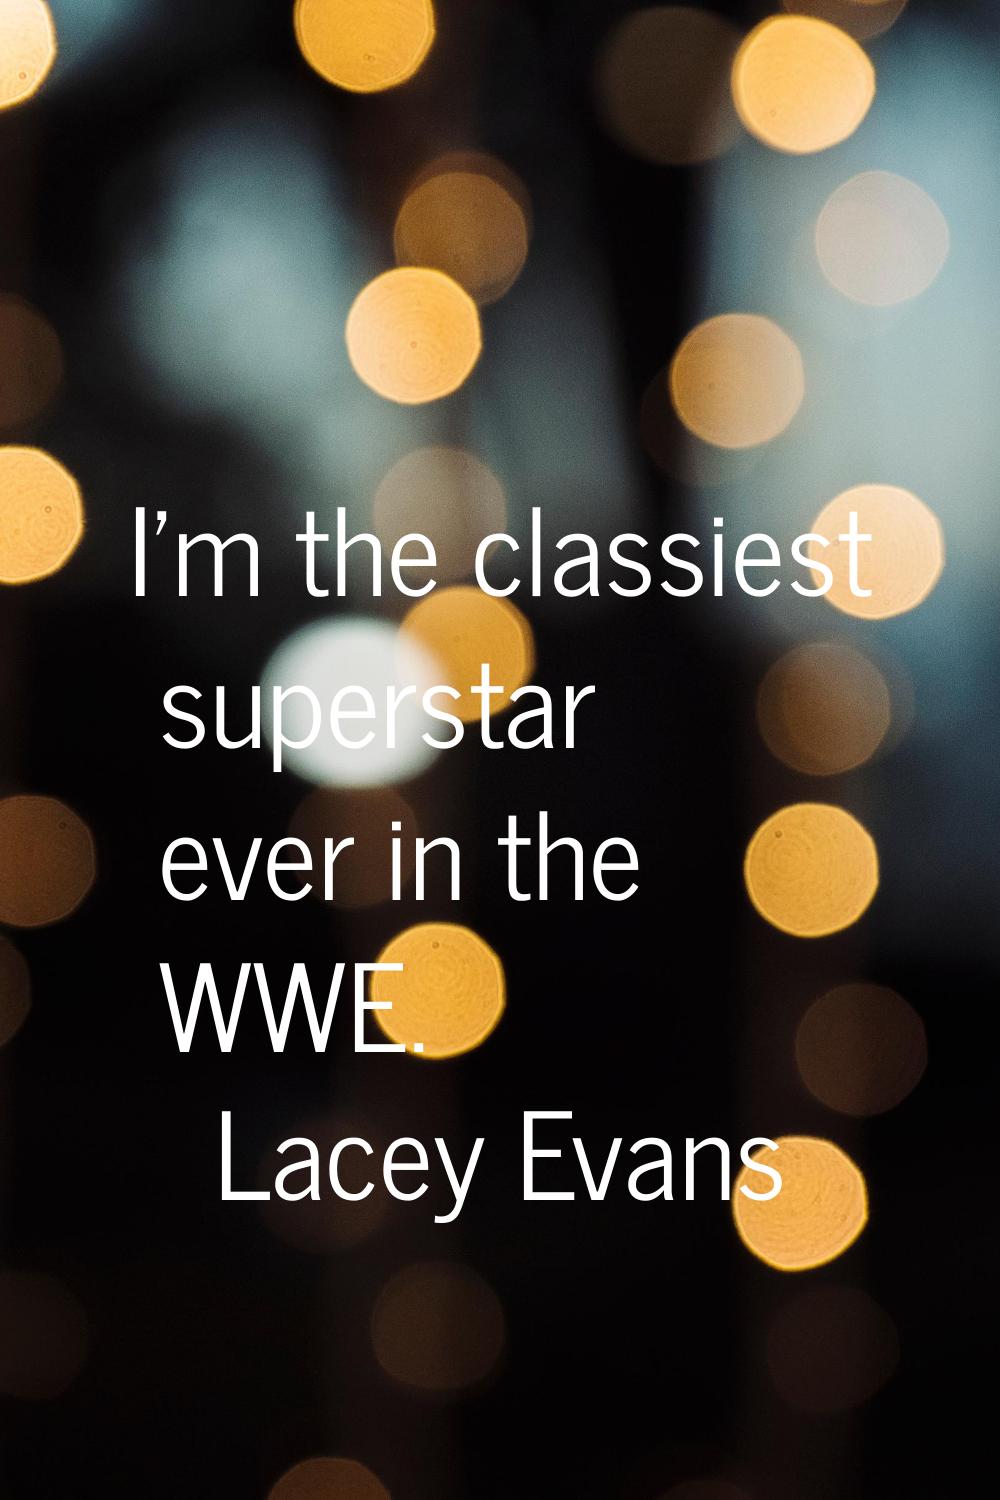 I'm the classiest superstar ever in the WWE.